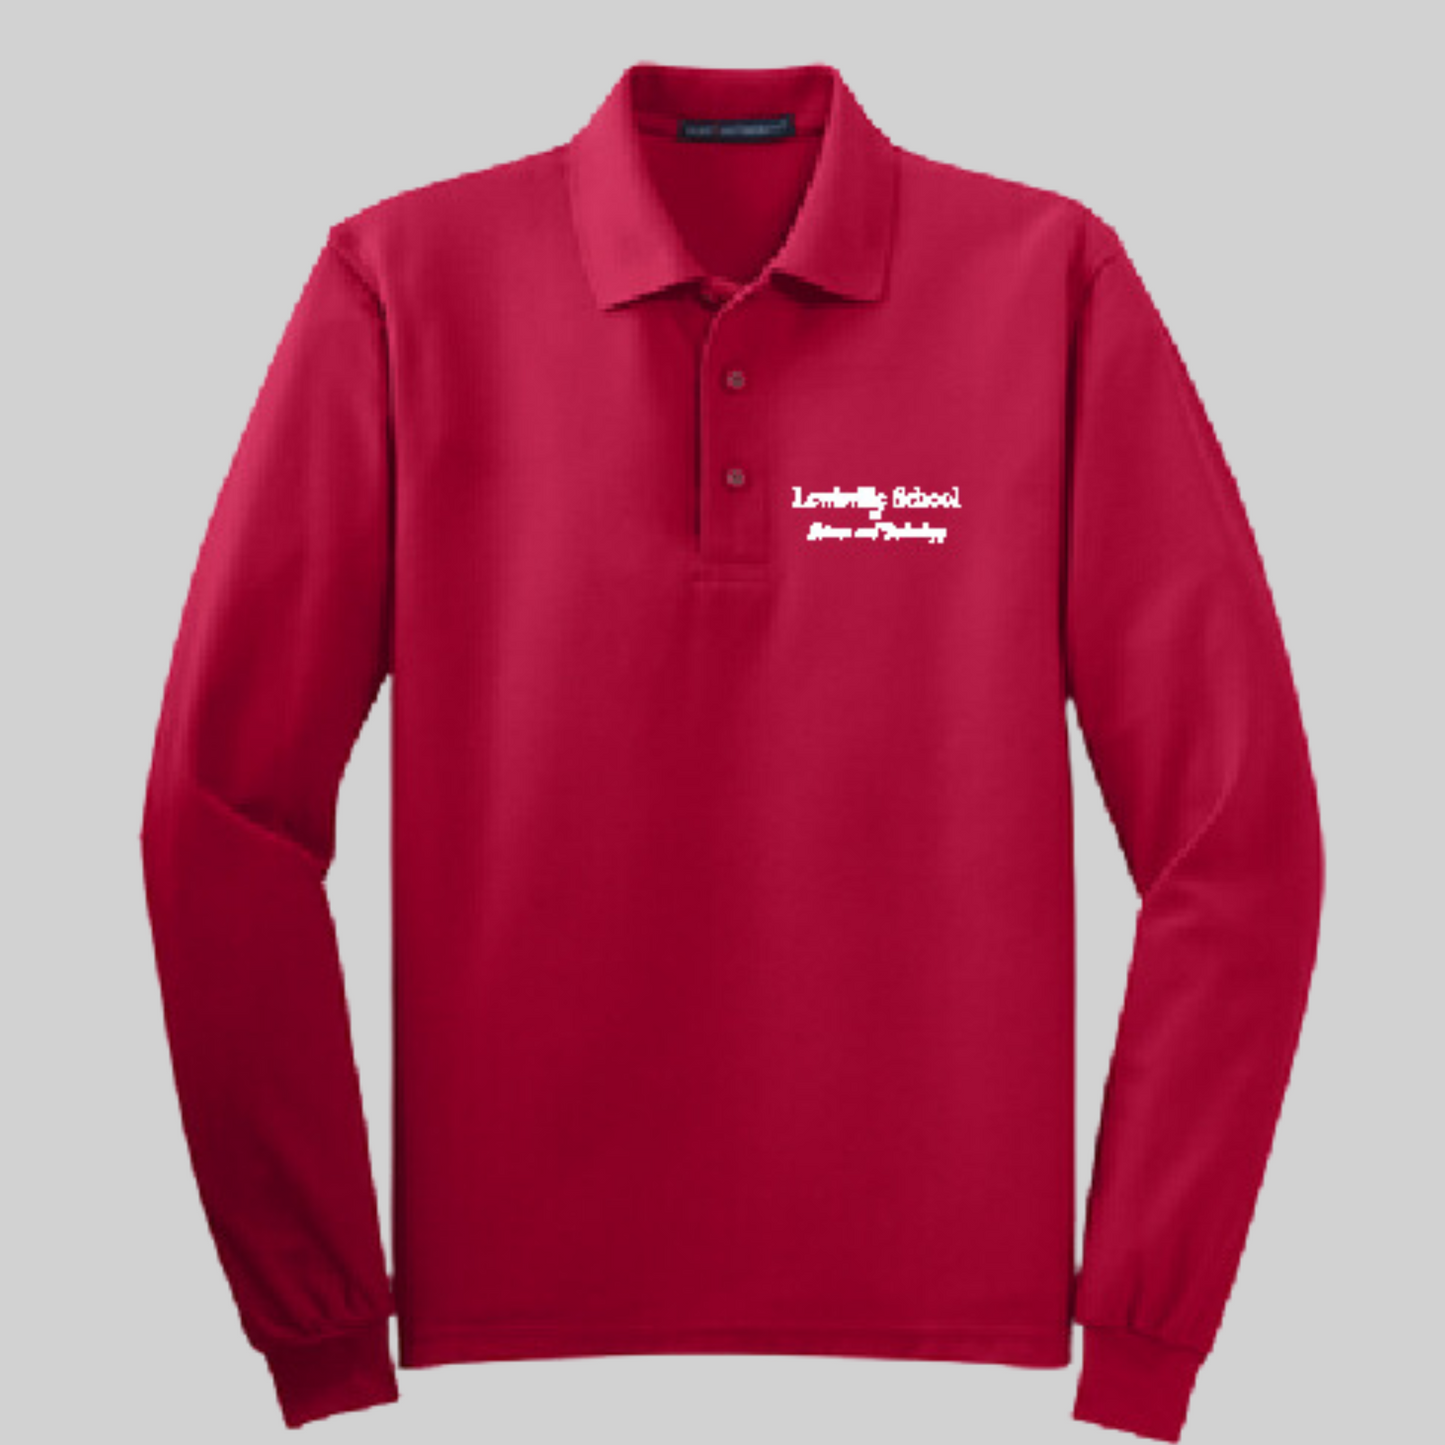 iSchool (Lewisville School of Science and Technology) Long Sleeve Cotton Polo